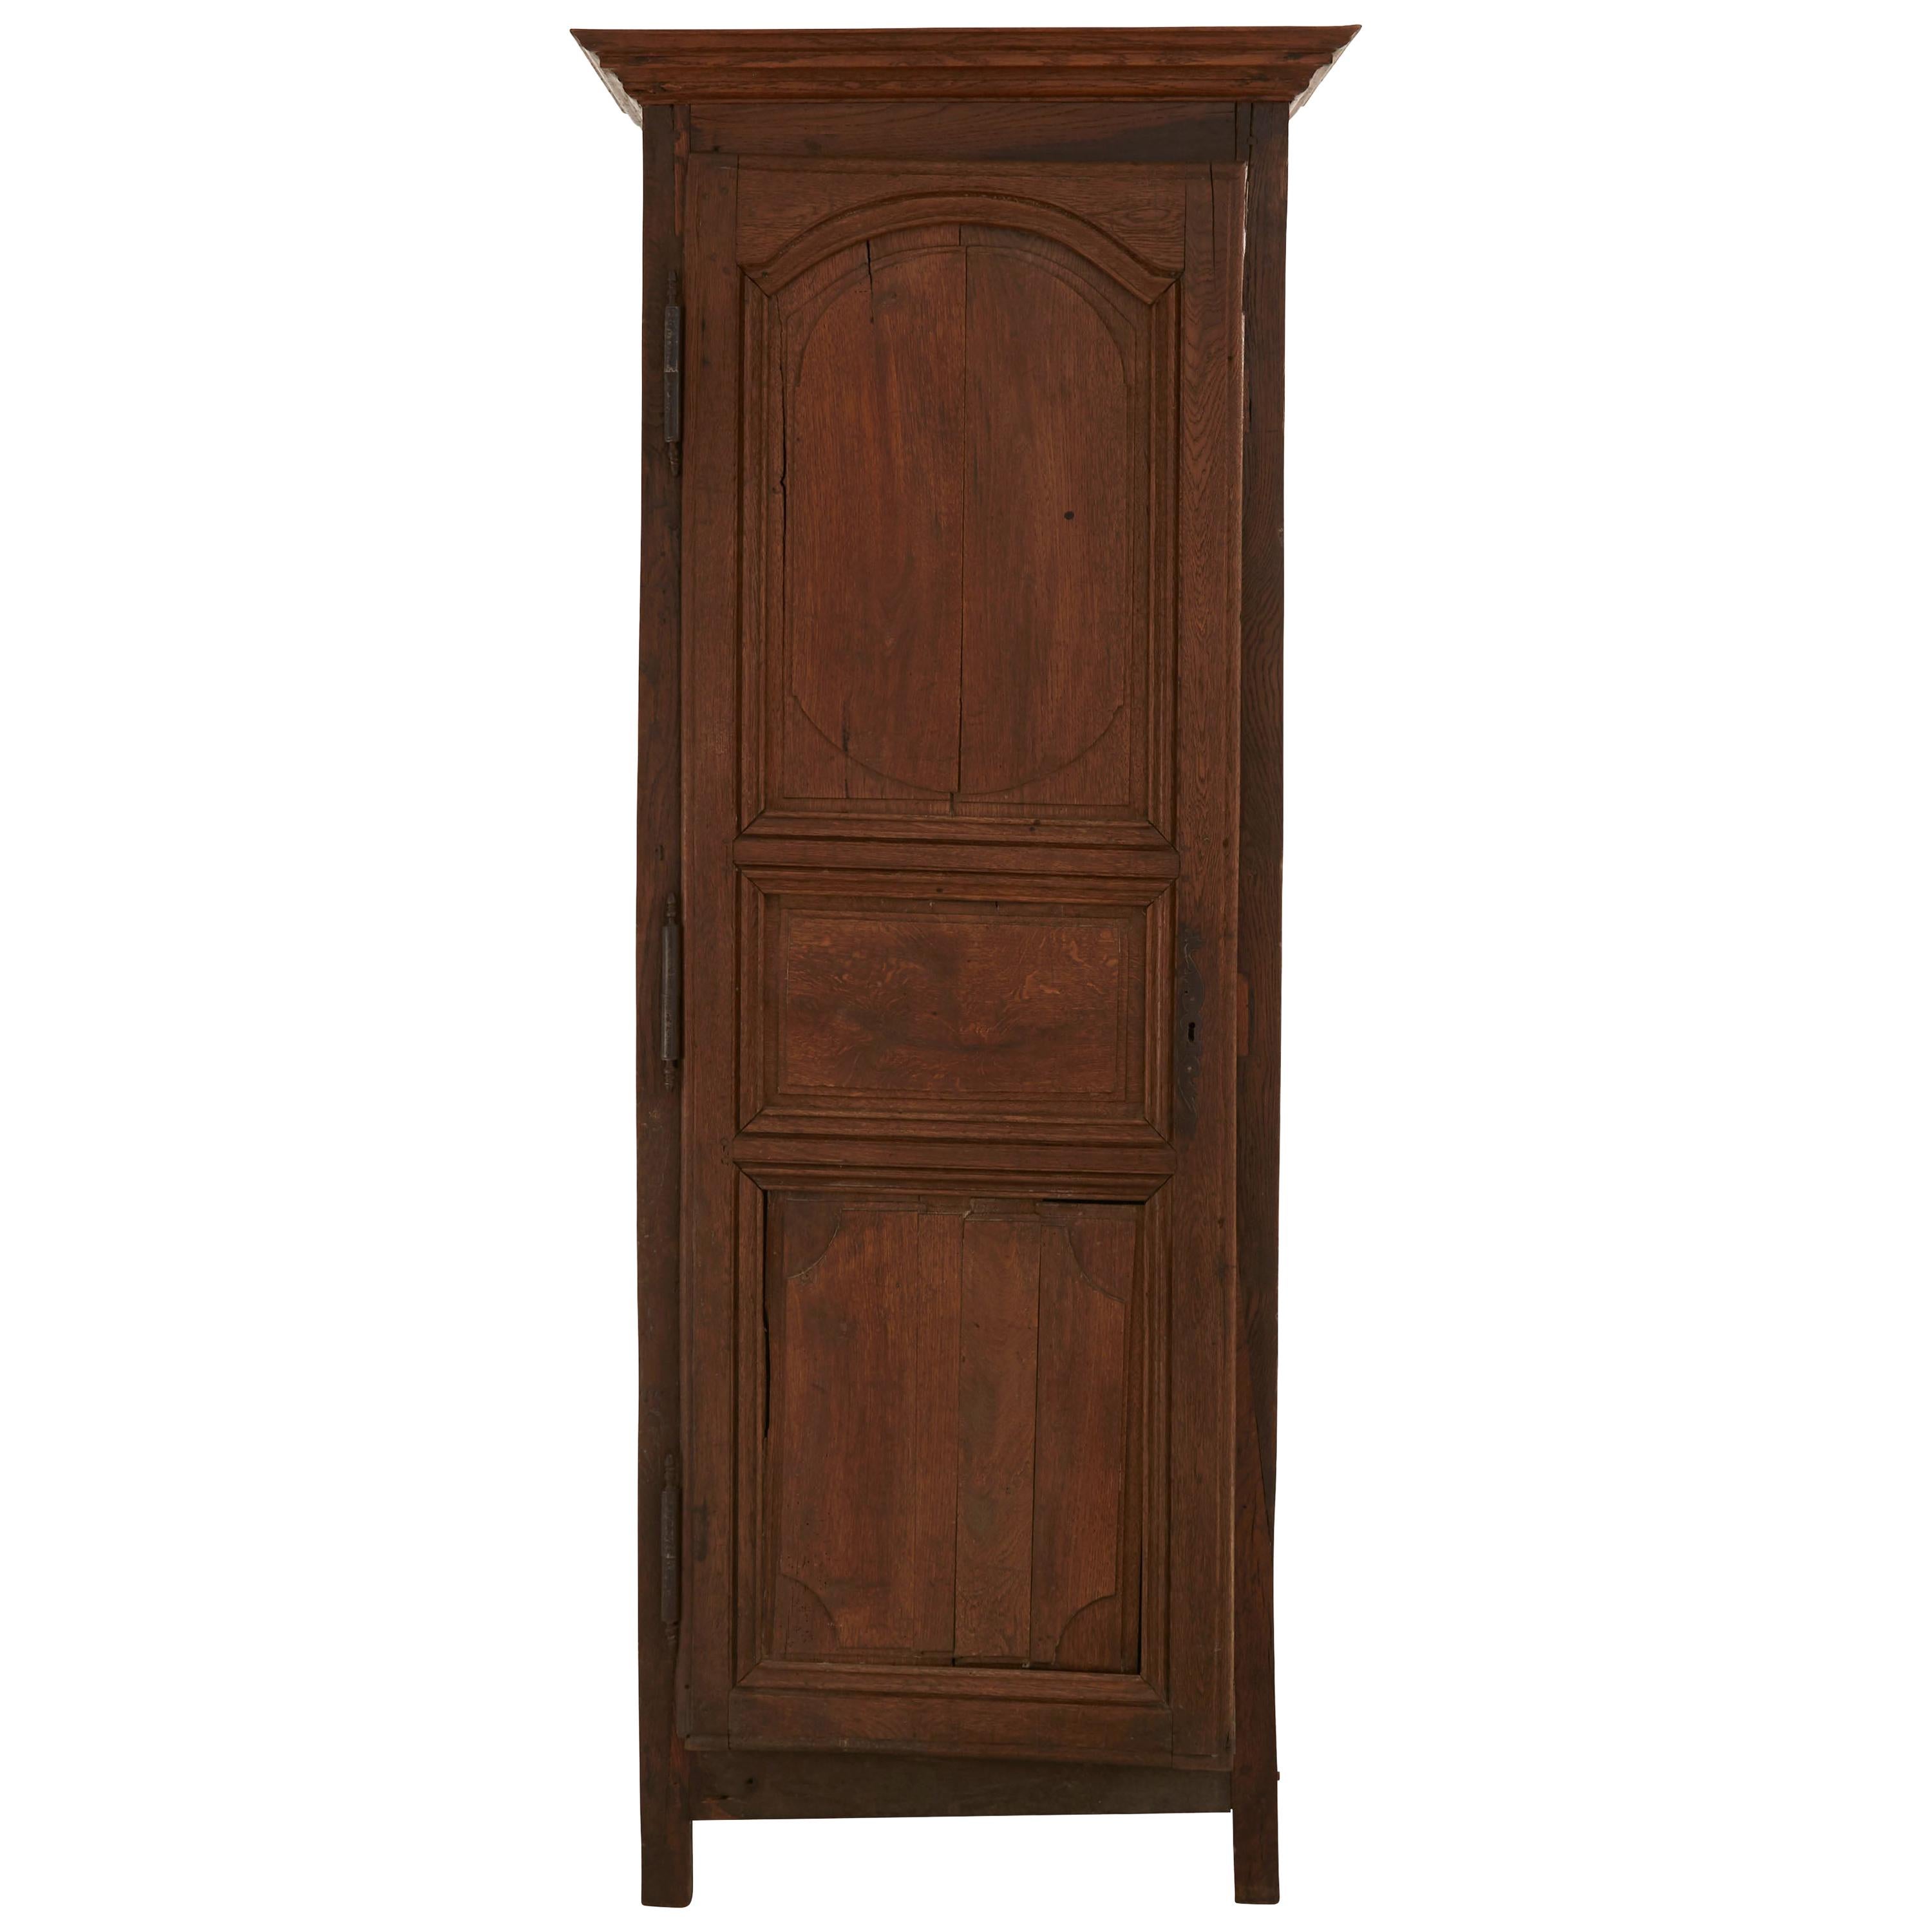 Late 19th Century French Wooden Wardrobe